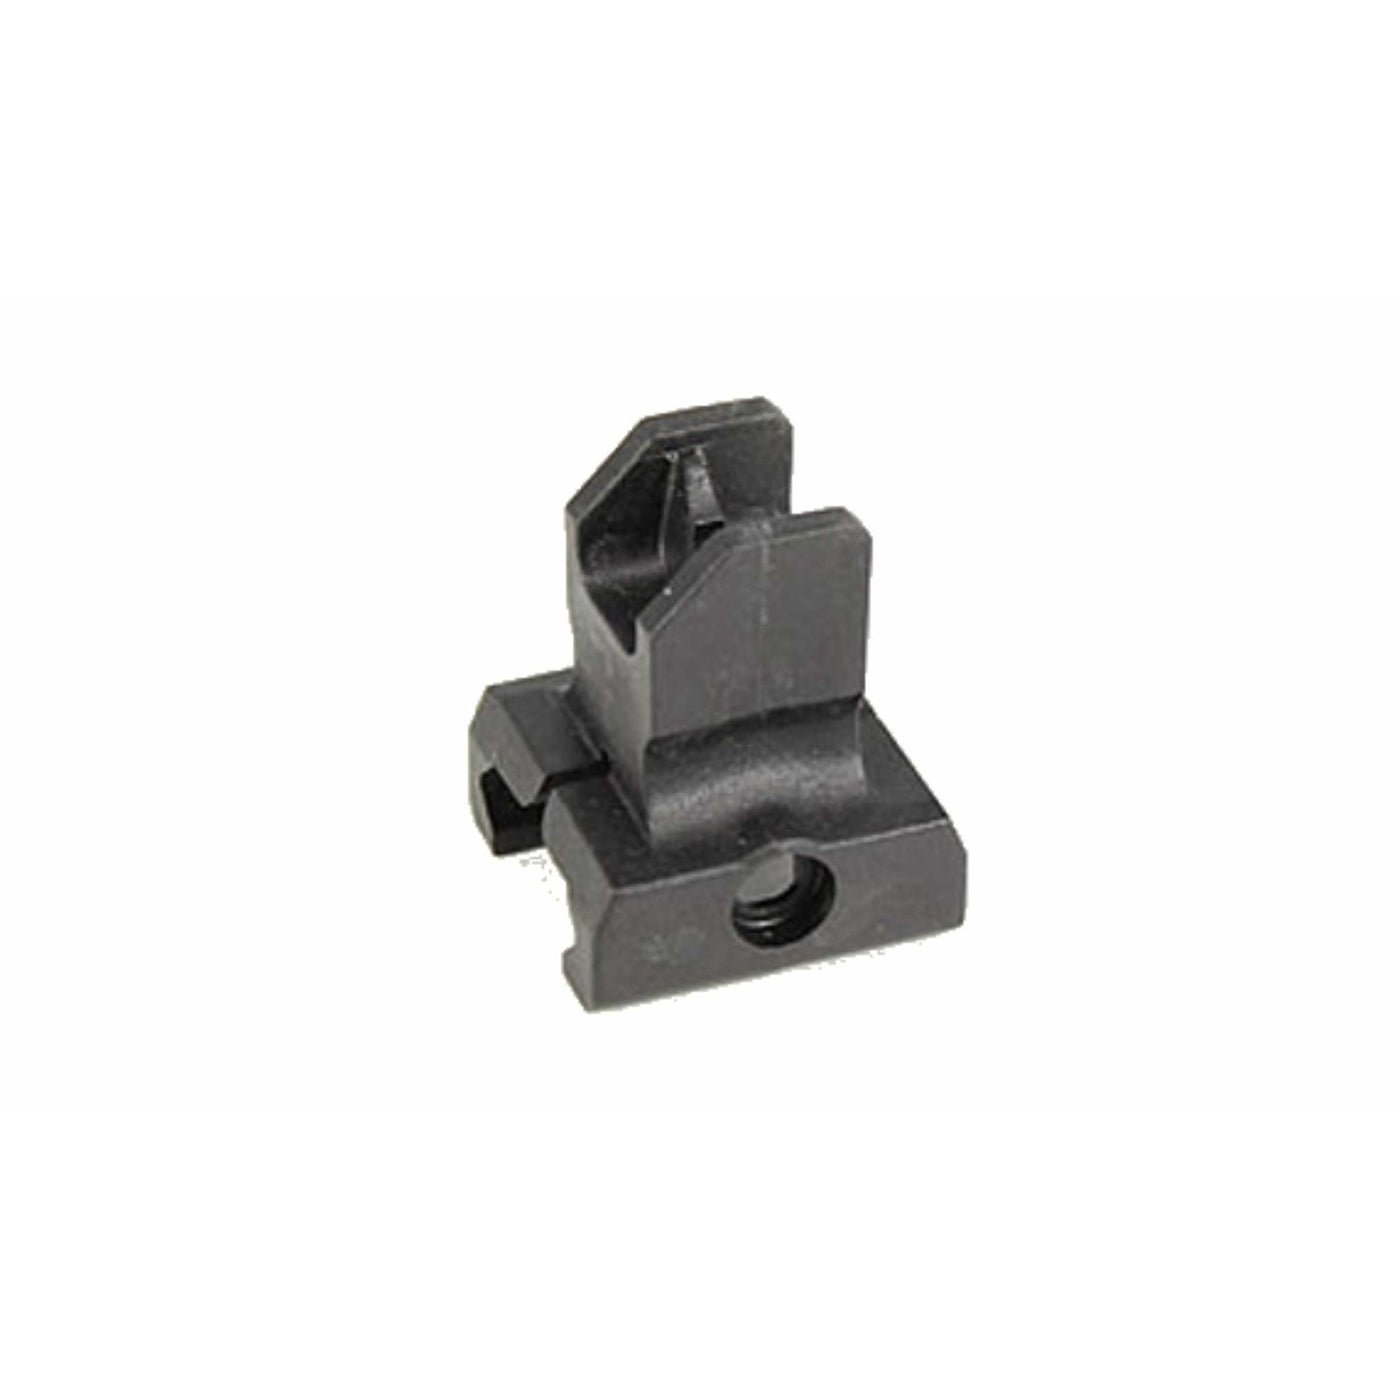 The Tippmann Part Number for this product is TA06041.